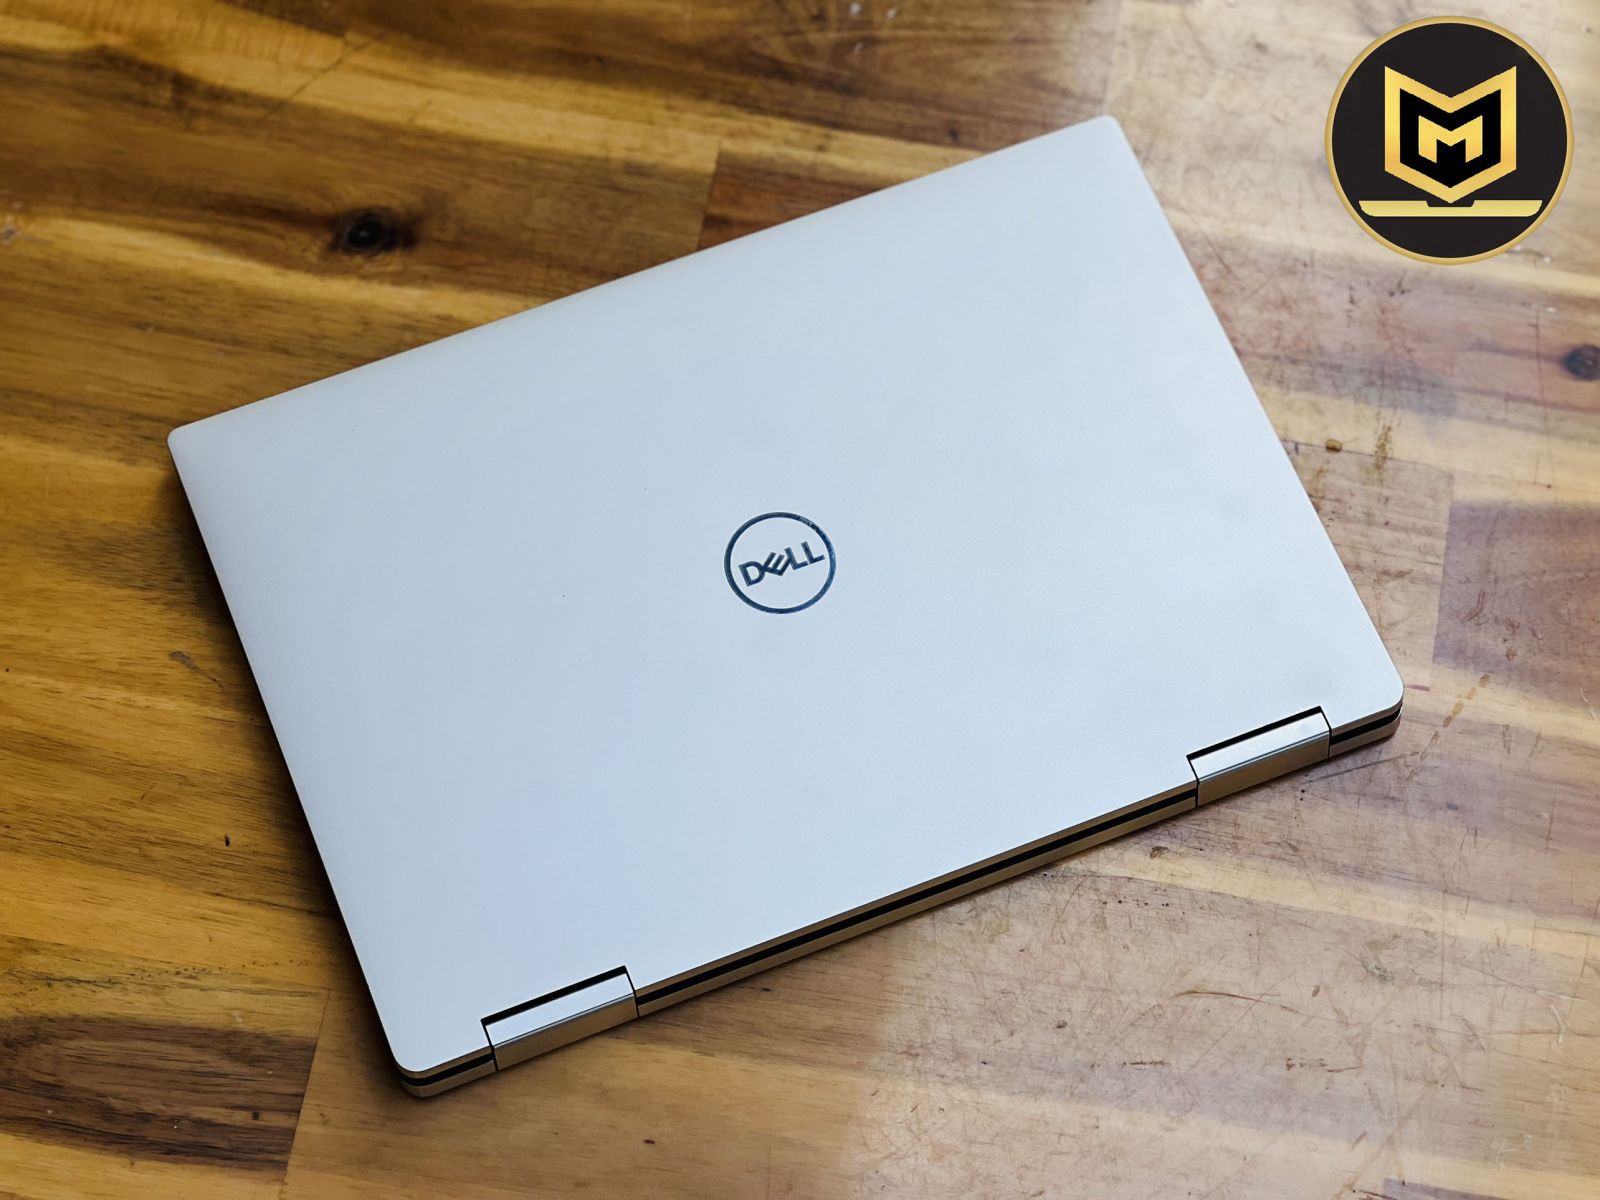 Dell XPS 13 9310 2in1 i5 1135G7